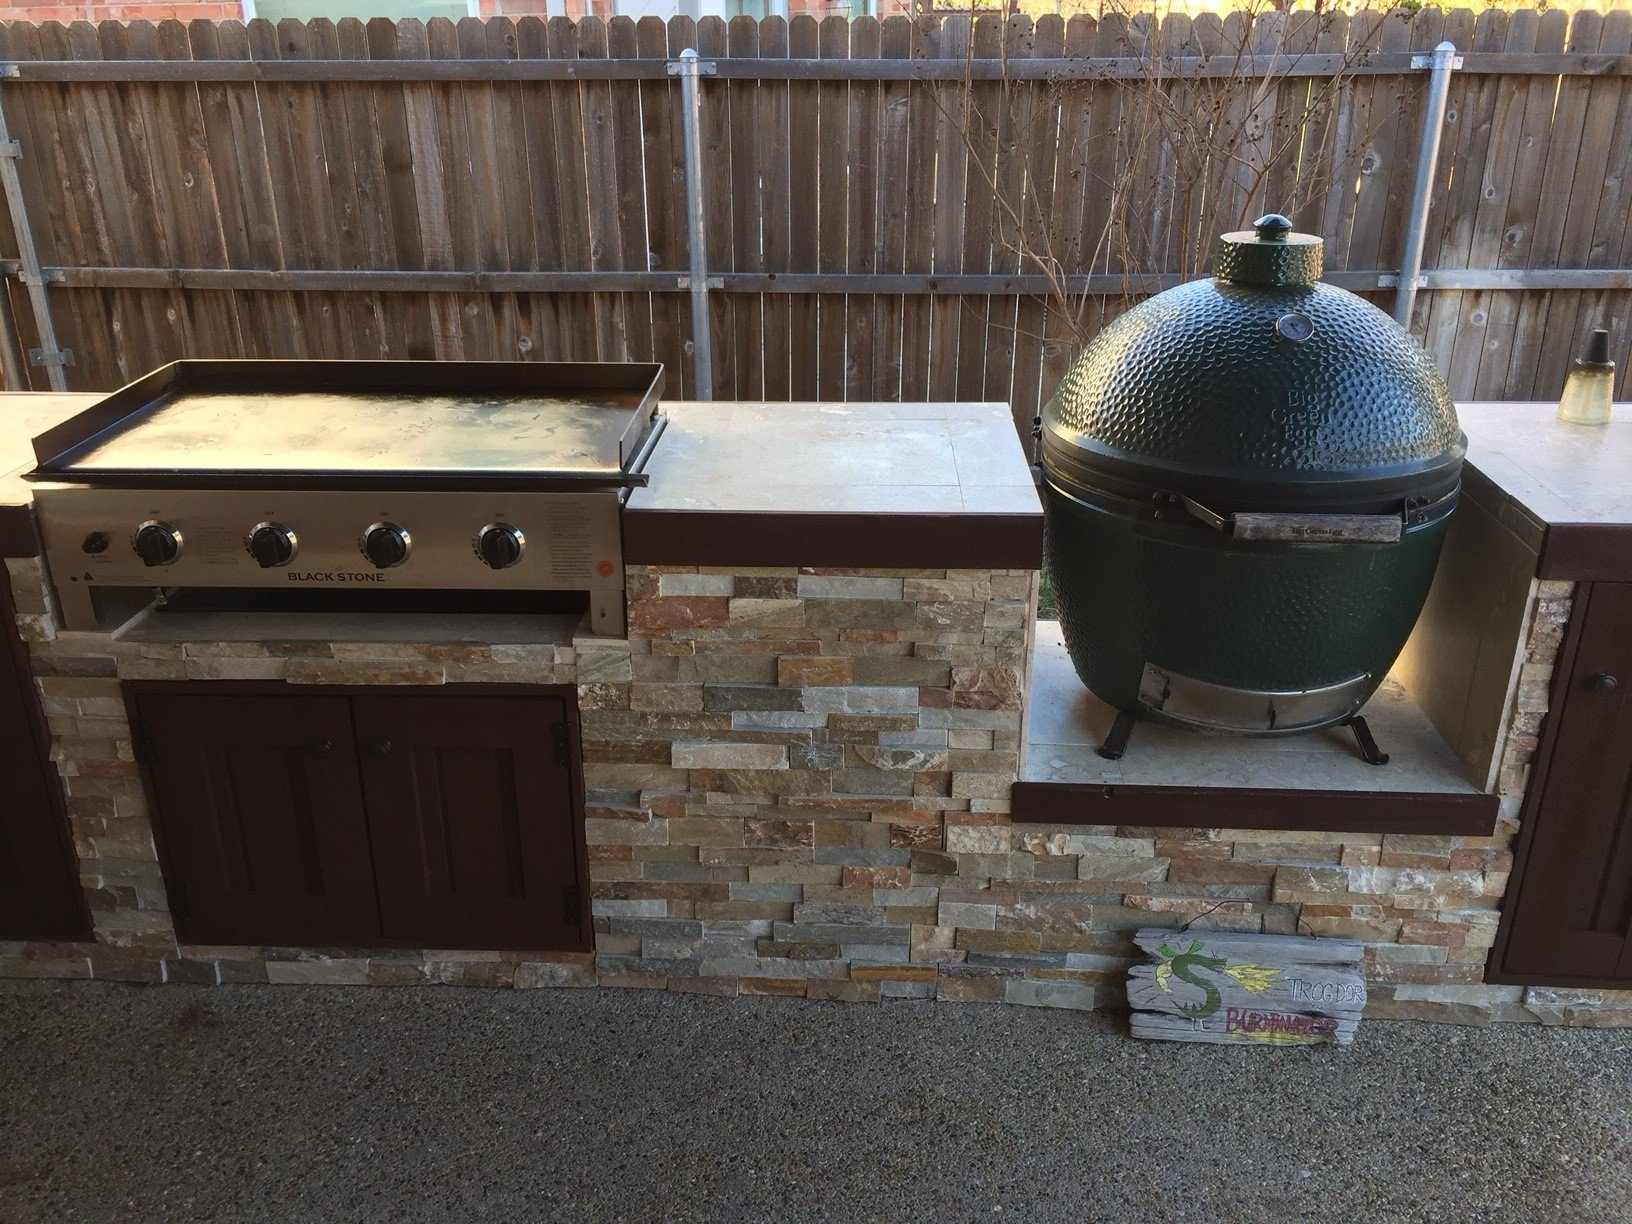 Outdoor Kitchen Griddle
 New Outdoor Kitchen & Covered Patio w Pics — Big Green